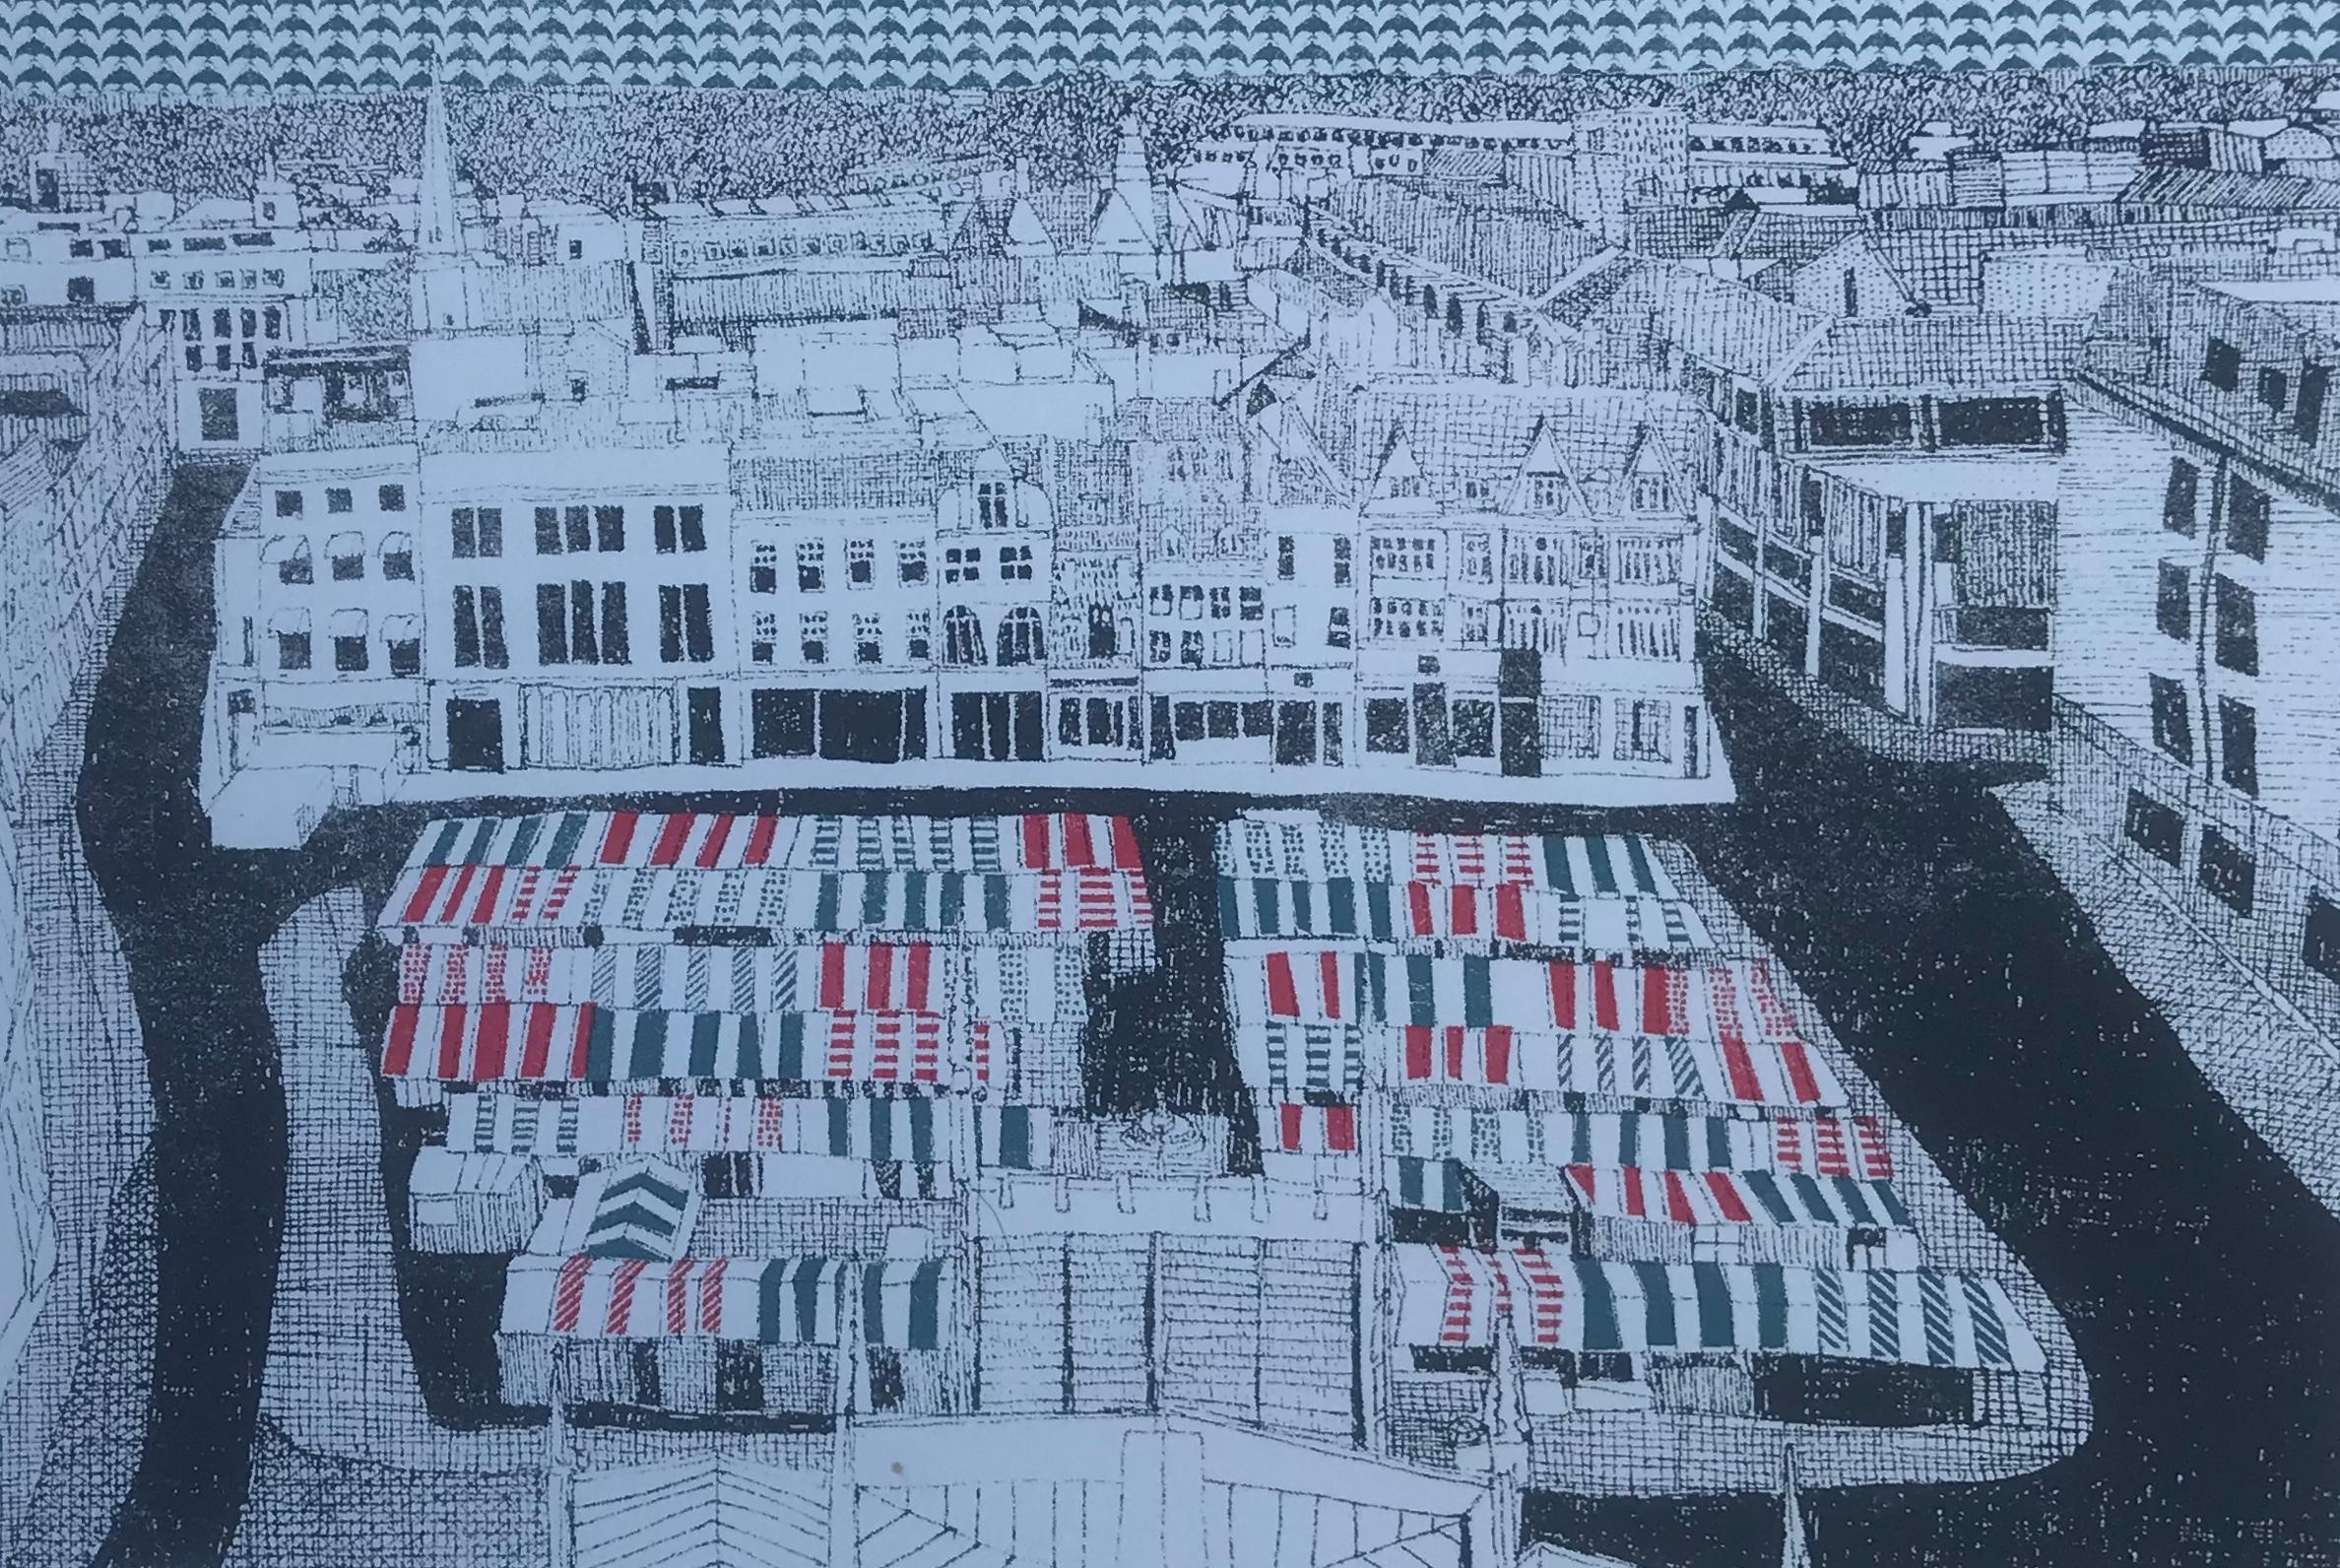 Cambridge Market by Clare Halifax
Limited Edition and hand signed by the artist 
Silkscreen Print on Paper
Edition of 75
Image Size: H 12cm x W 25cm
Sheet Size: H 22cm x W 31cm
Signed
Sold Unframed

Please note that any insitu images are purely an